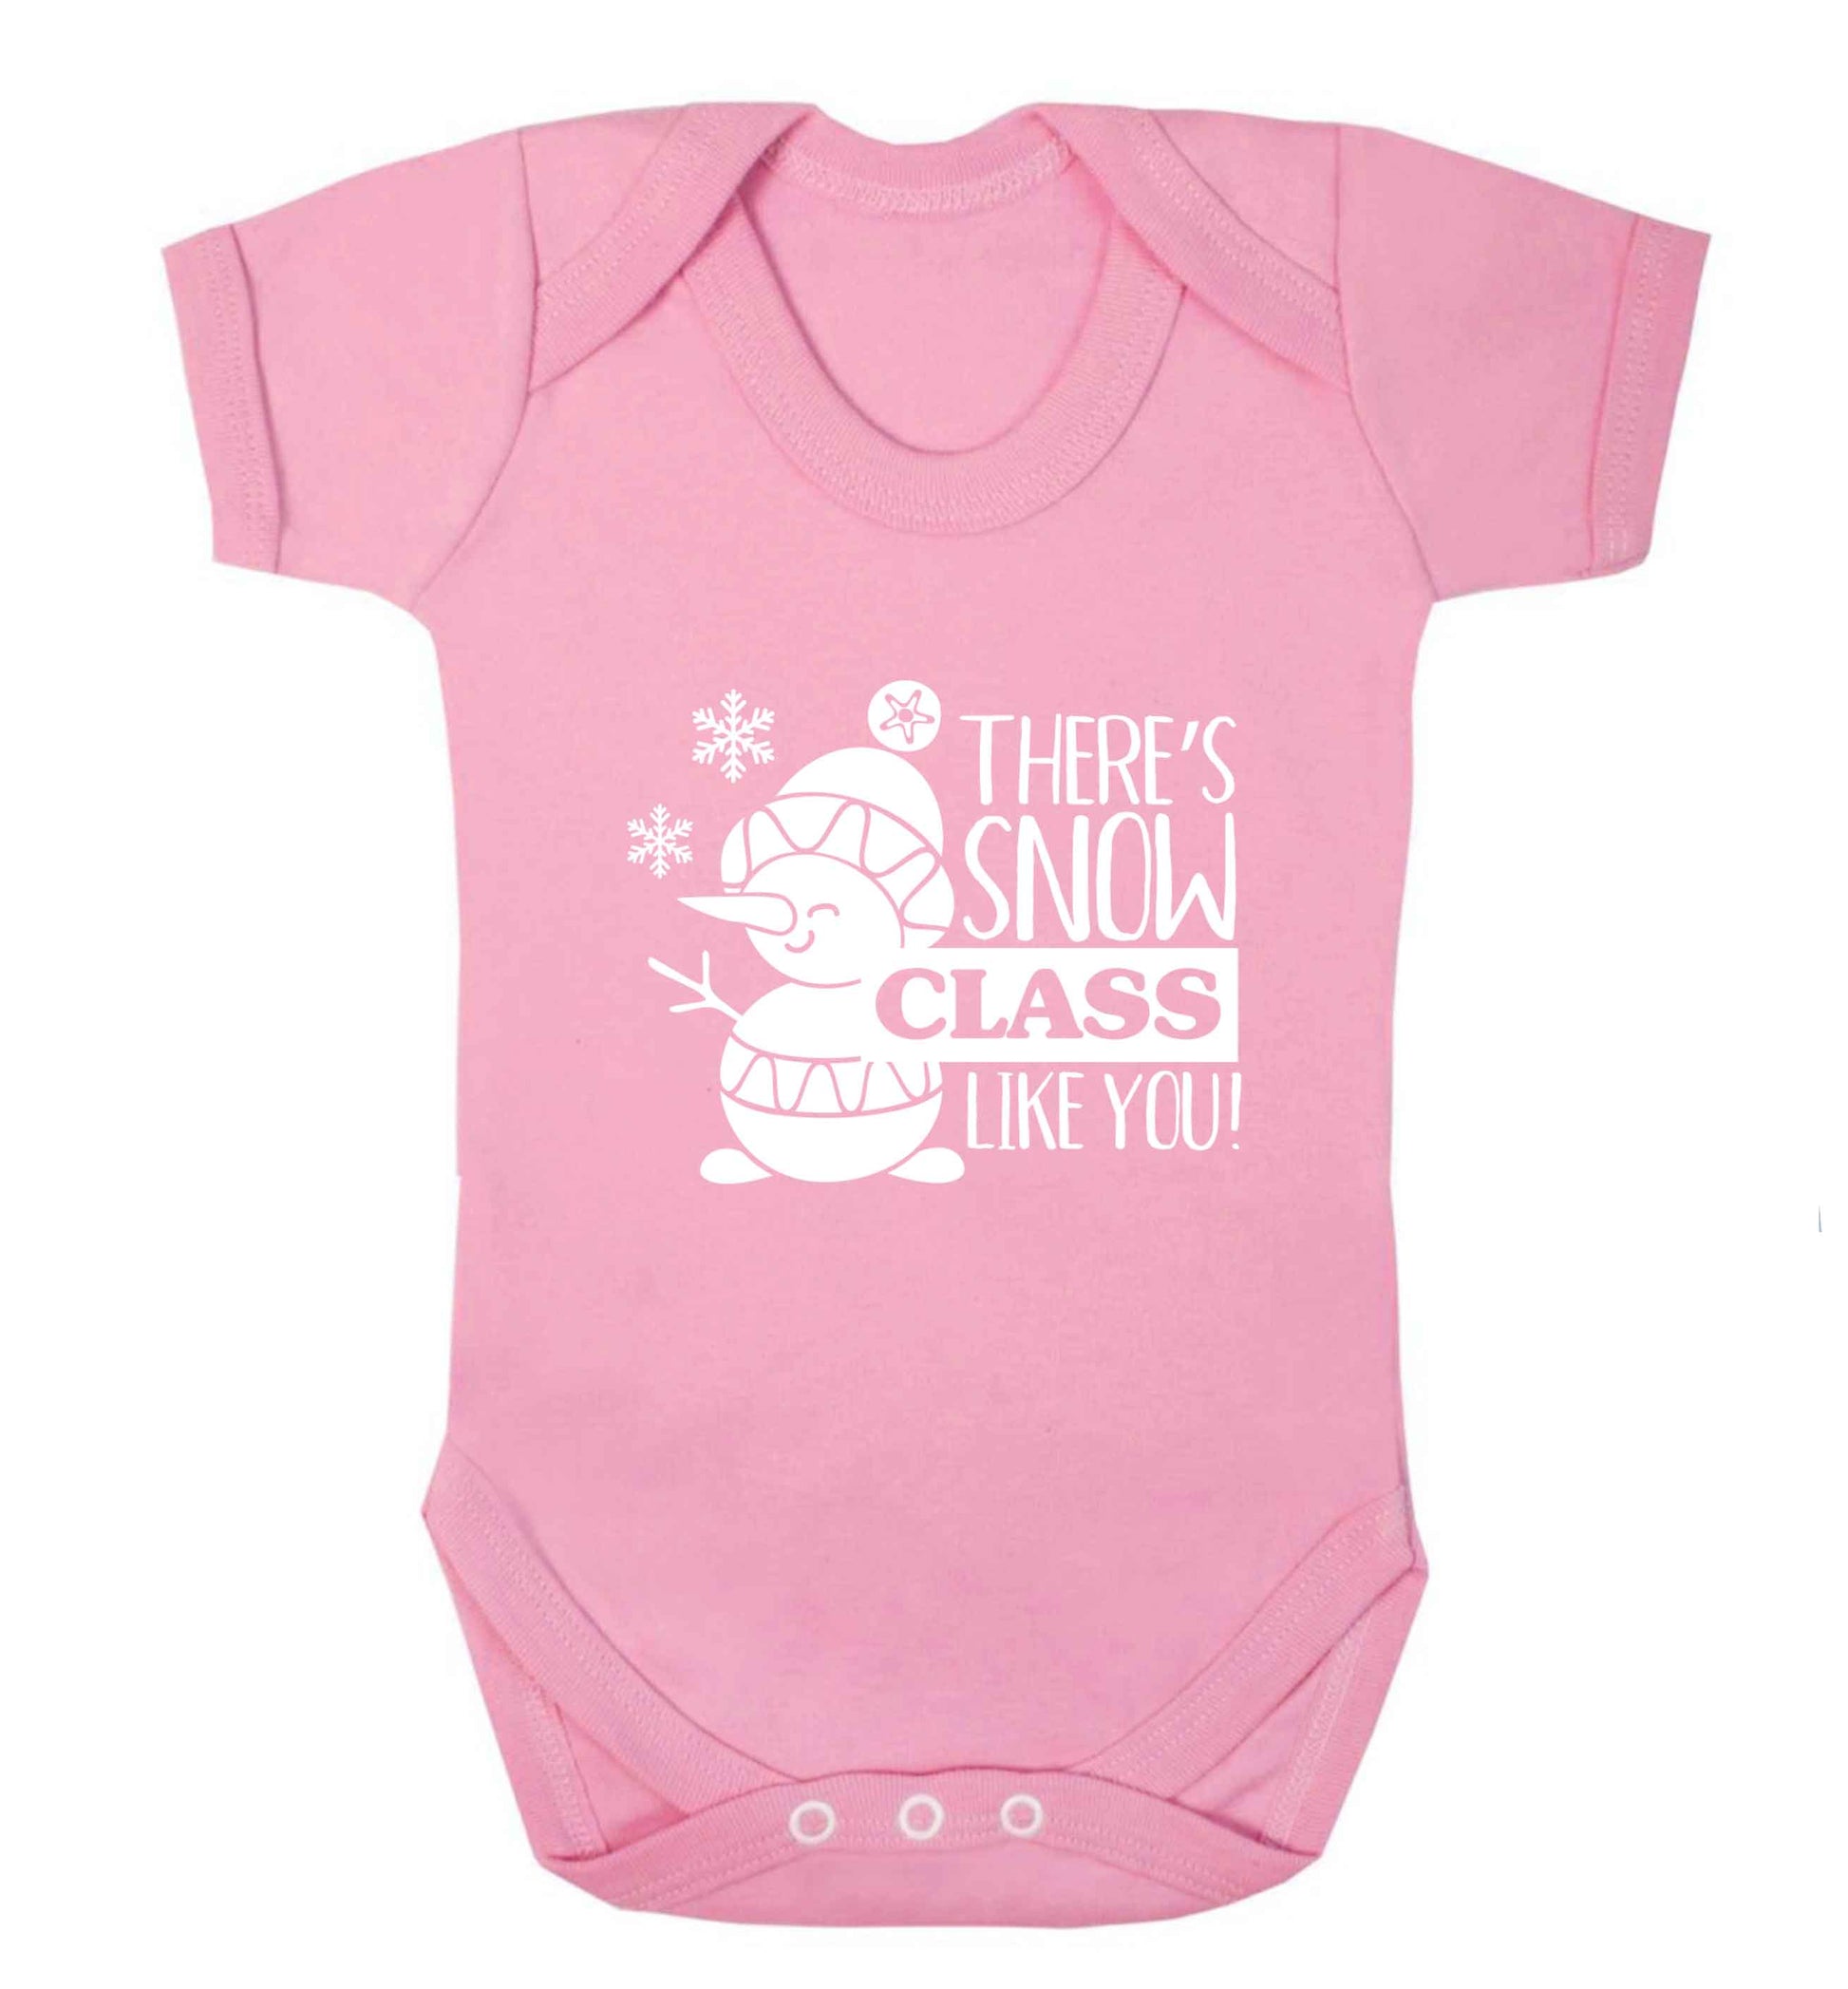 There's snow class like you baby vest pale pink 18-24 months